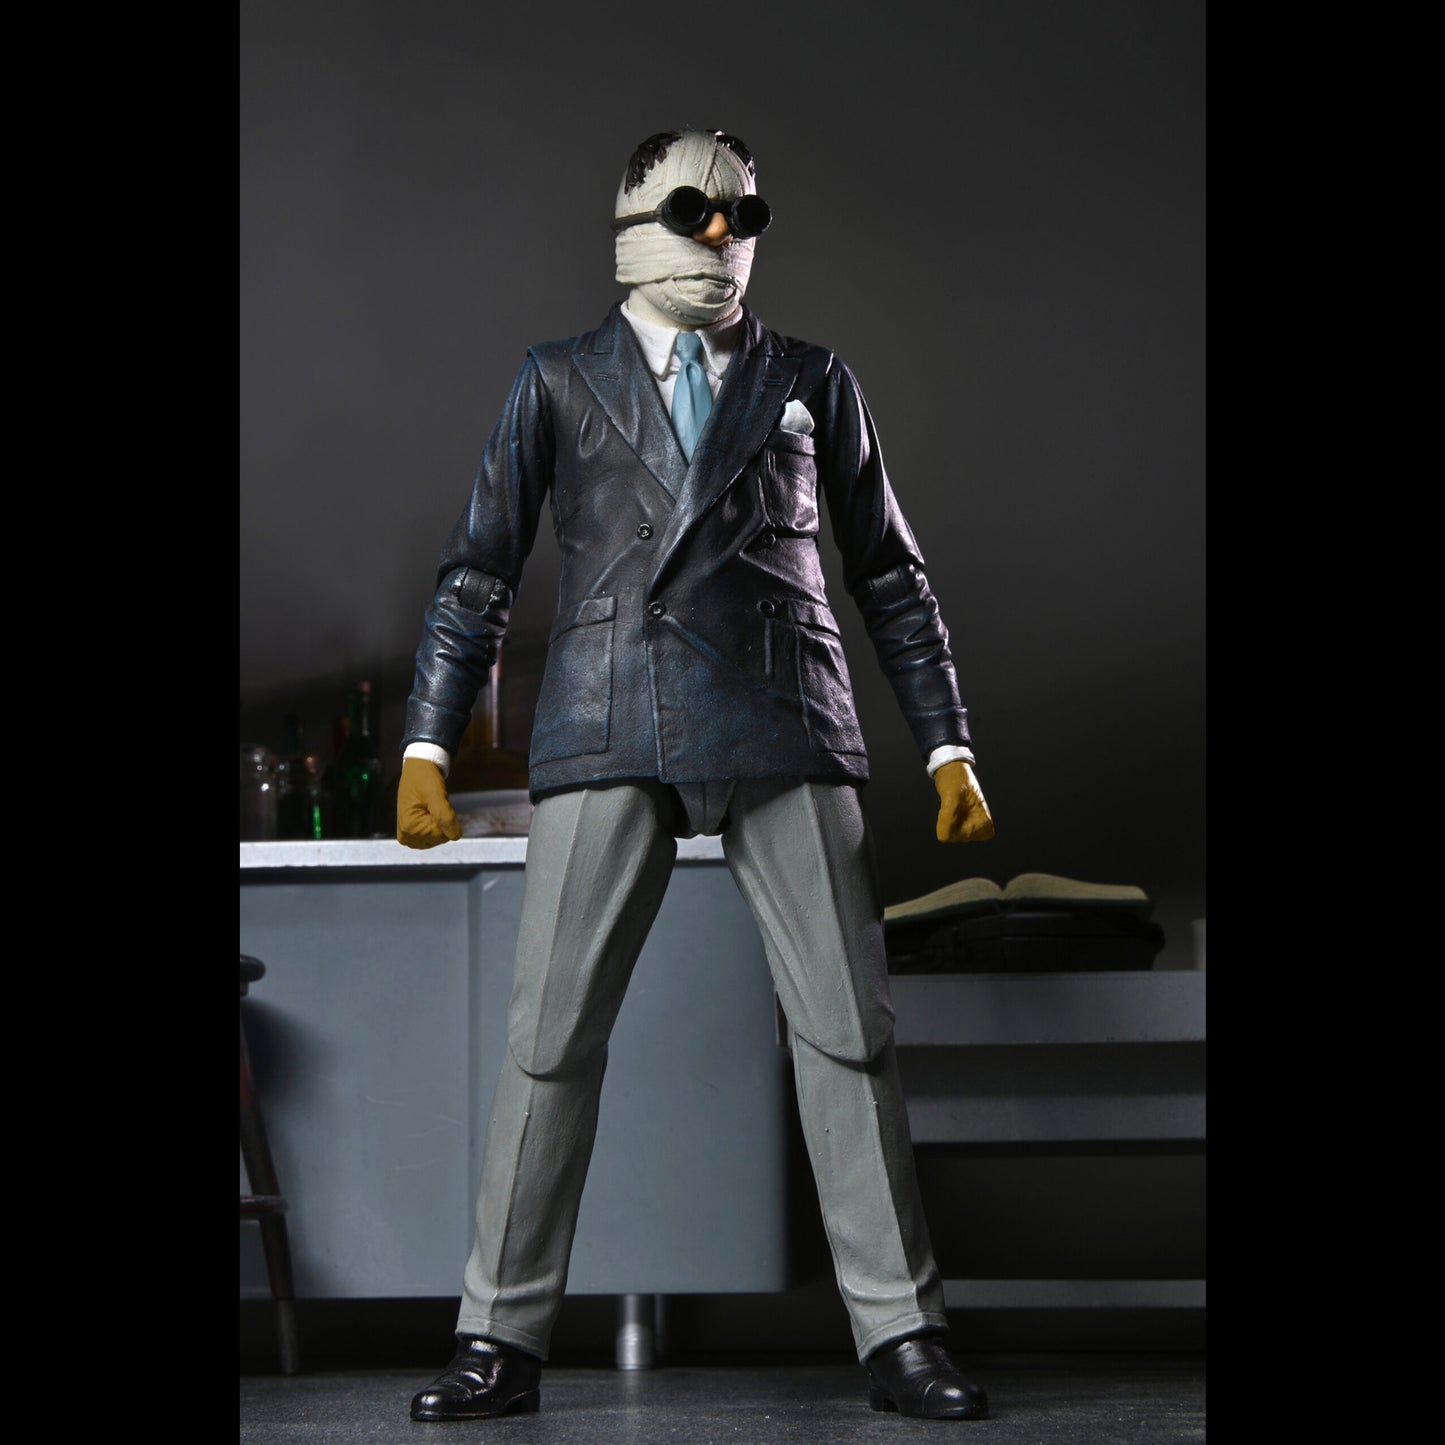 NECA: Universal Monsters - Ultimate Invisible Man 7" Tall Action Figure